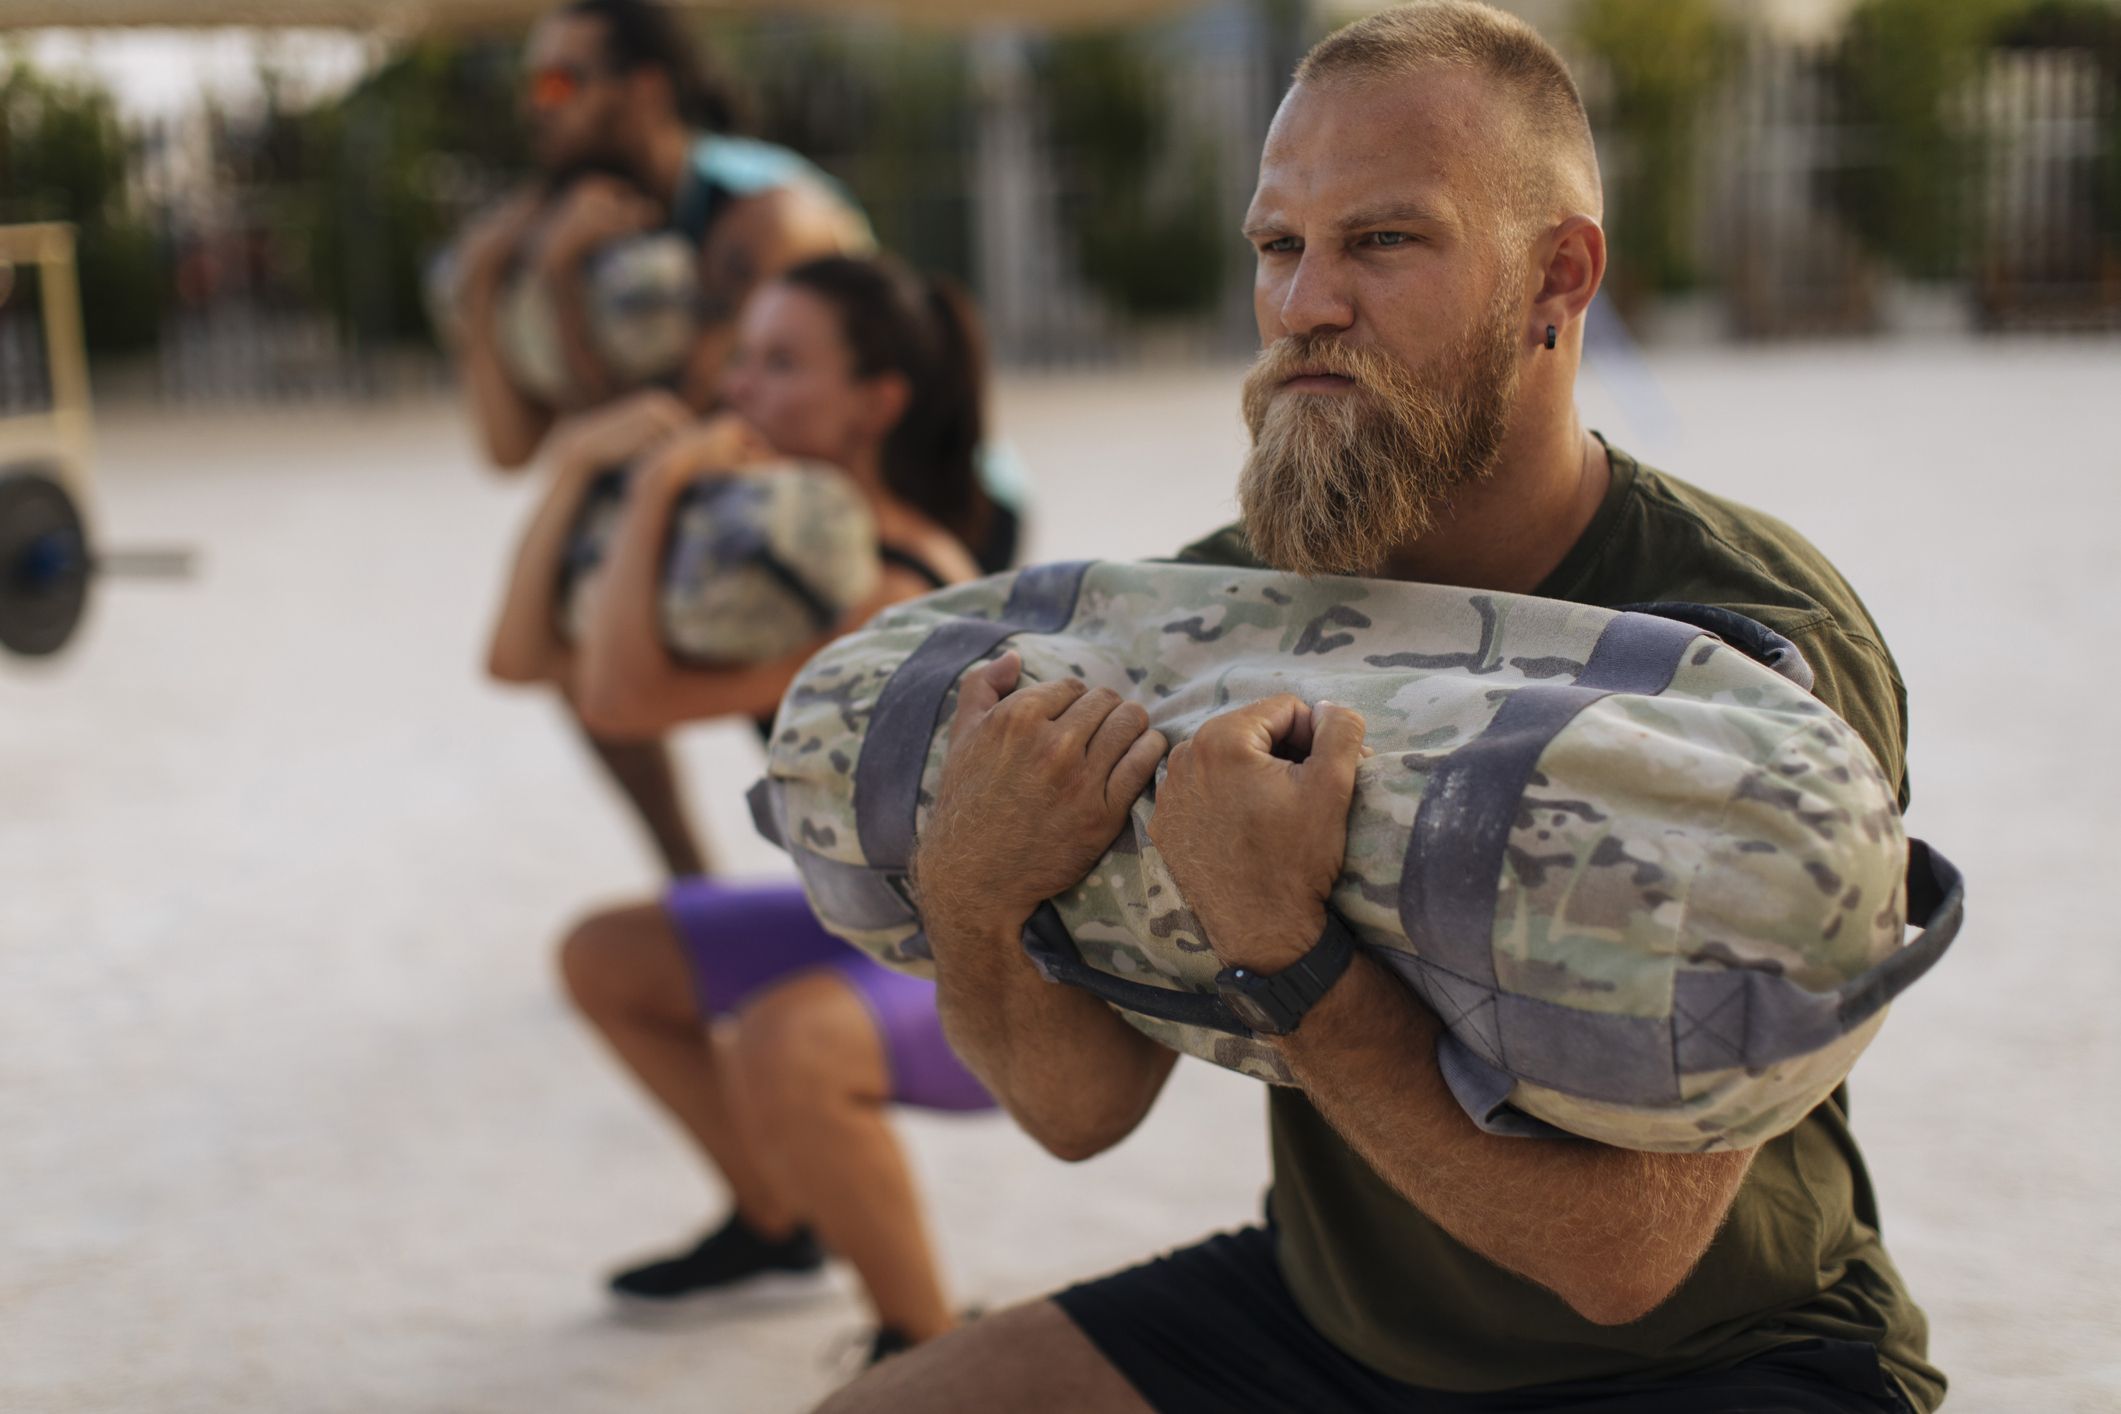 Crush Your Next Leg Workout With This Sandbag Finisher